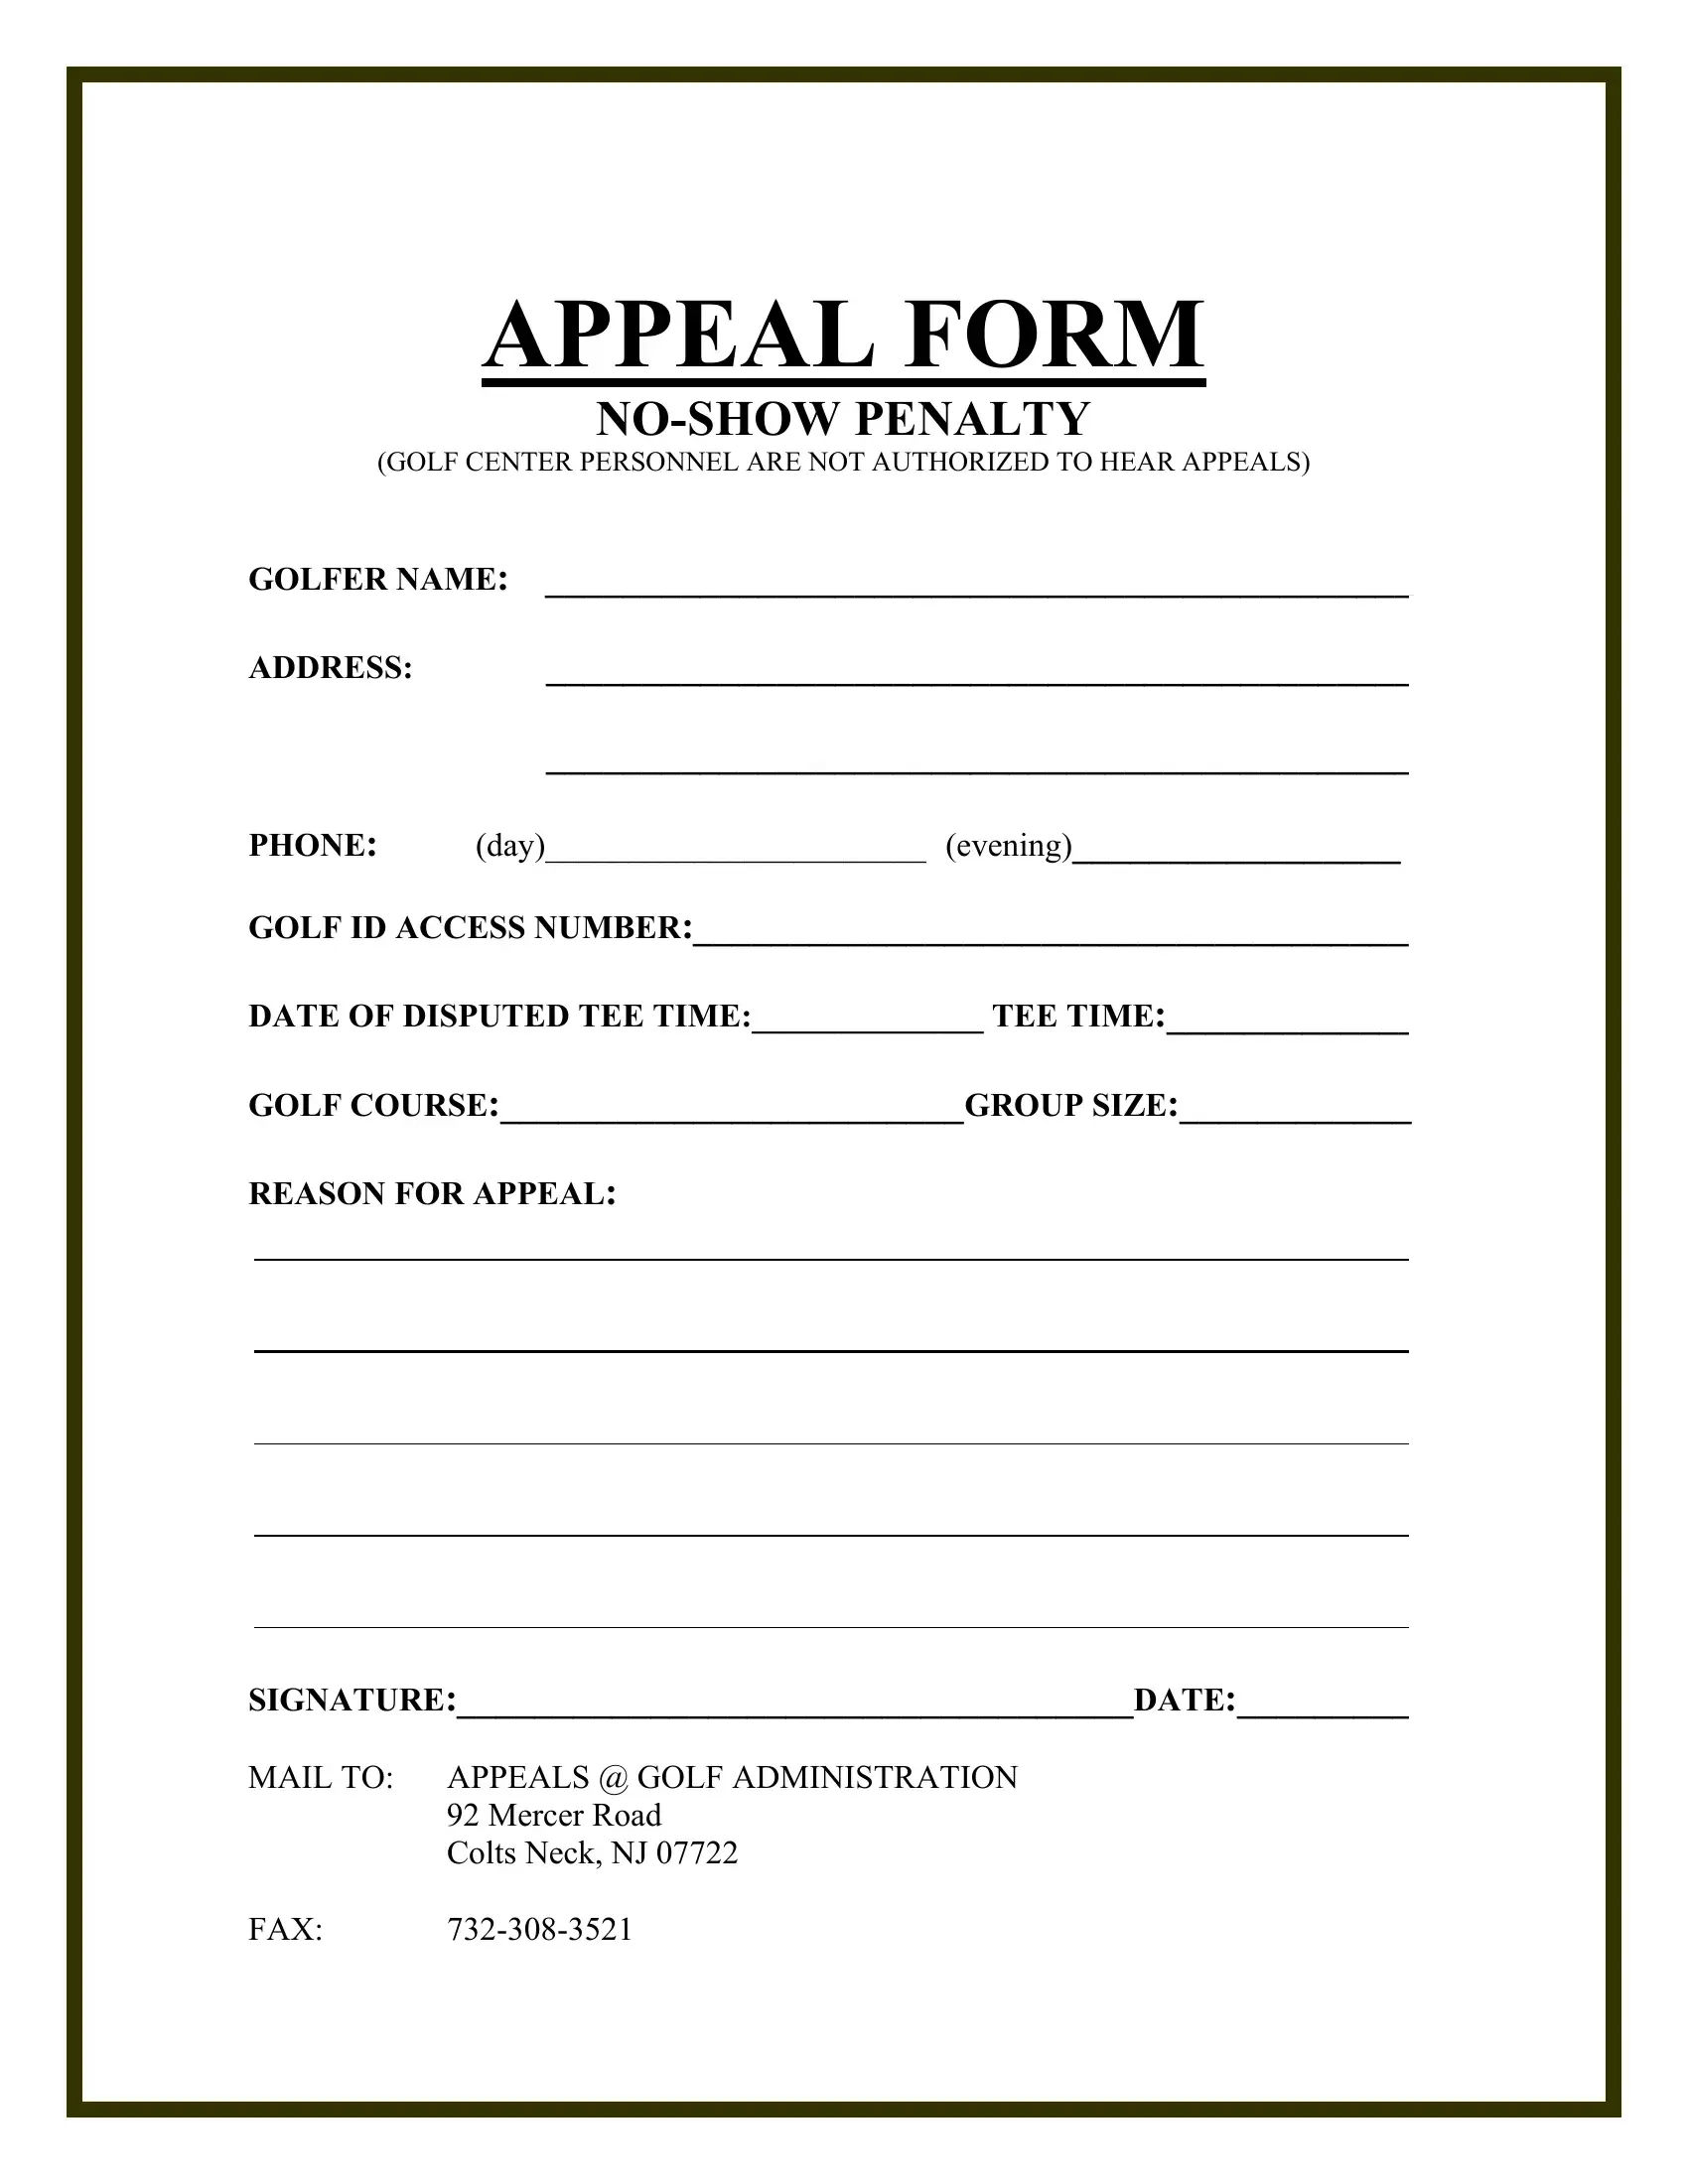 Appeal Form Preview